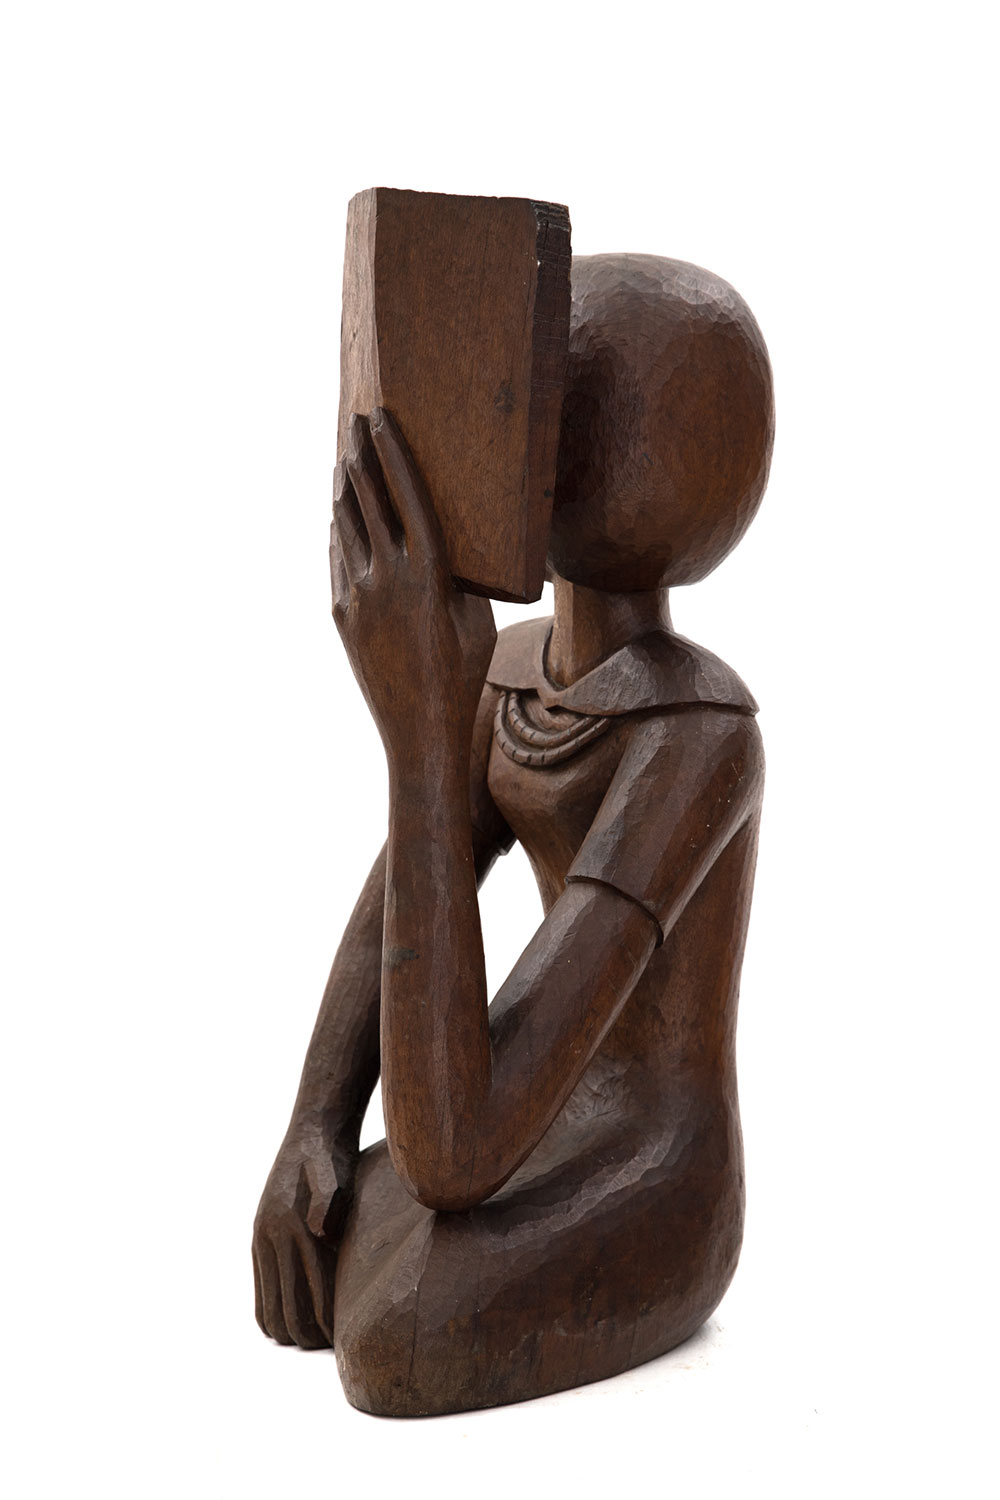 Lot 31 Samwel Wanjau (Kenyan, 1938–2013) Woman Reading, undated (circa late 1970s to early 1980s) at the Art Auction East Africa 2019